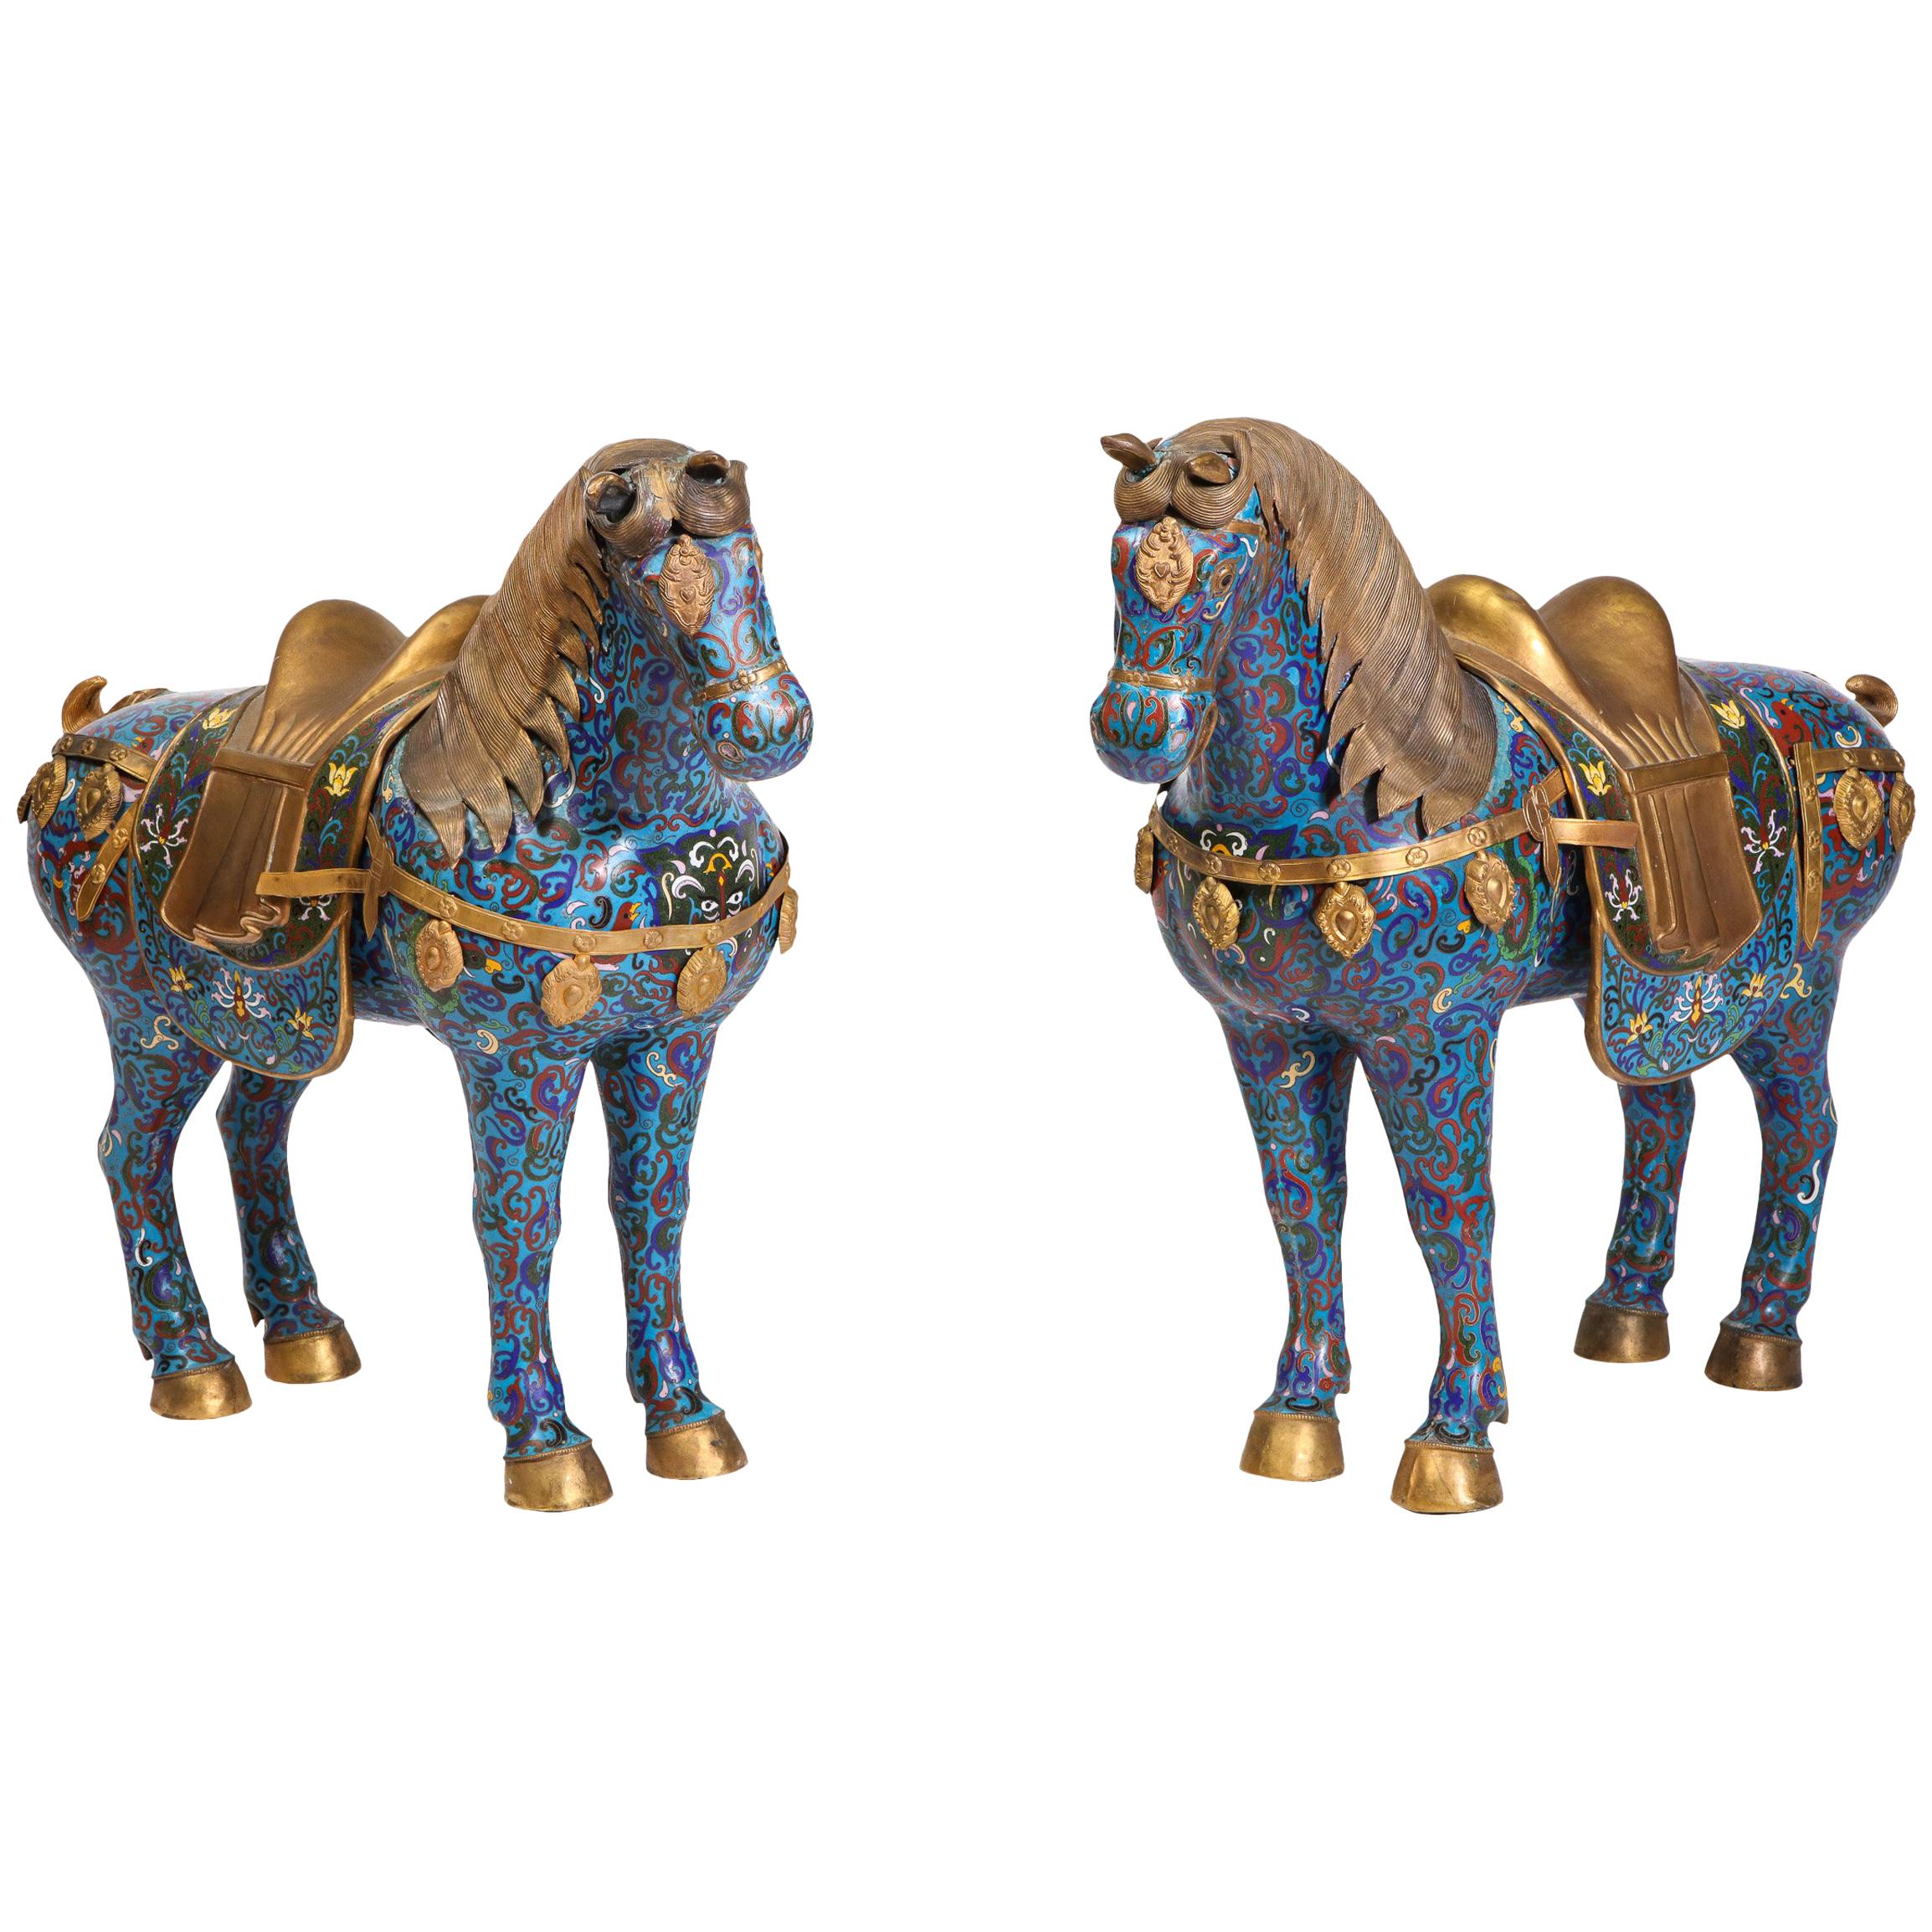 handcrafted in floral patterns over a gilded metal background Pair of Old Chinese Cloisonné Horse Figurines